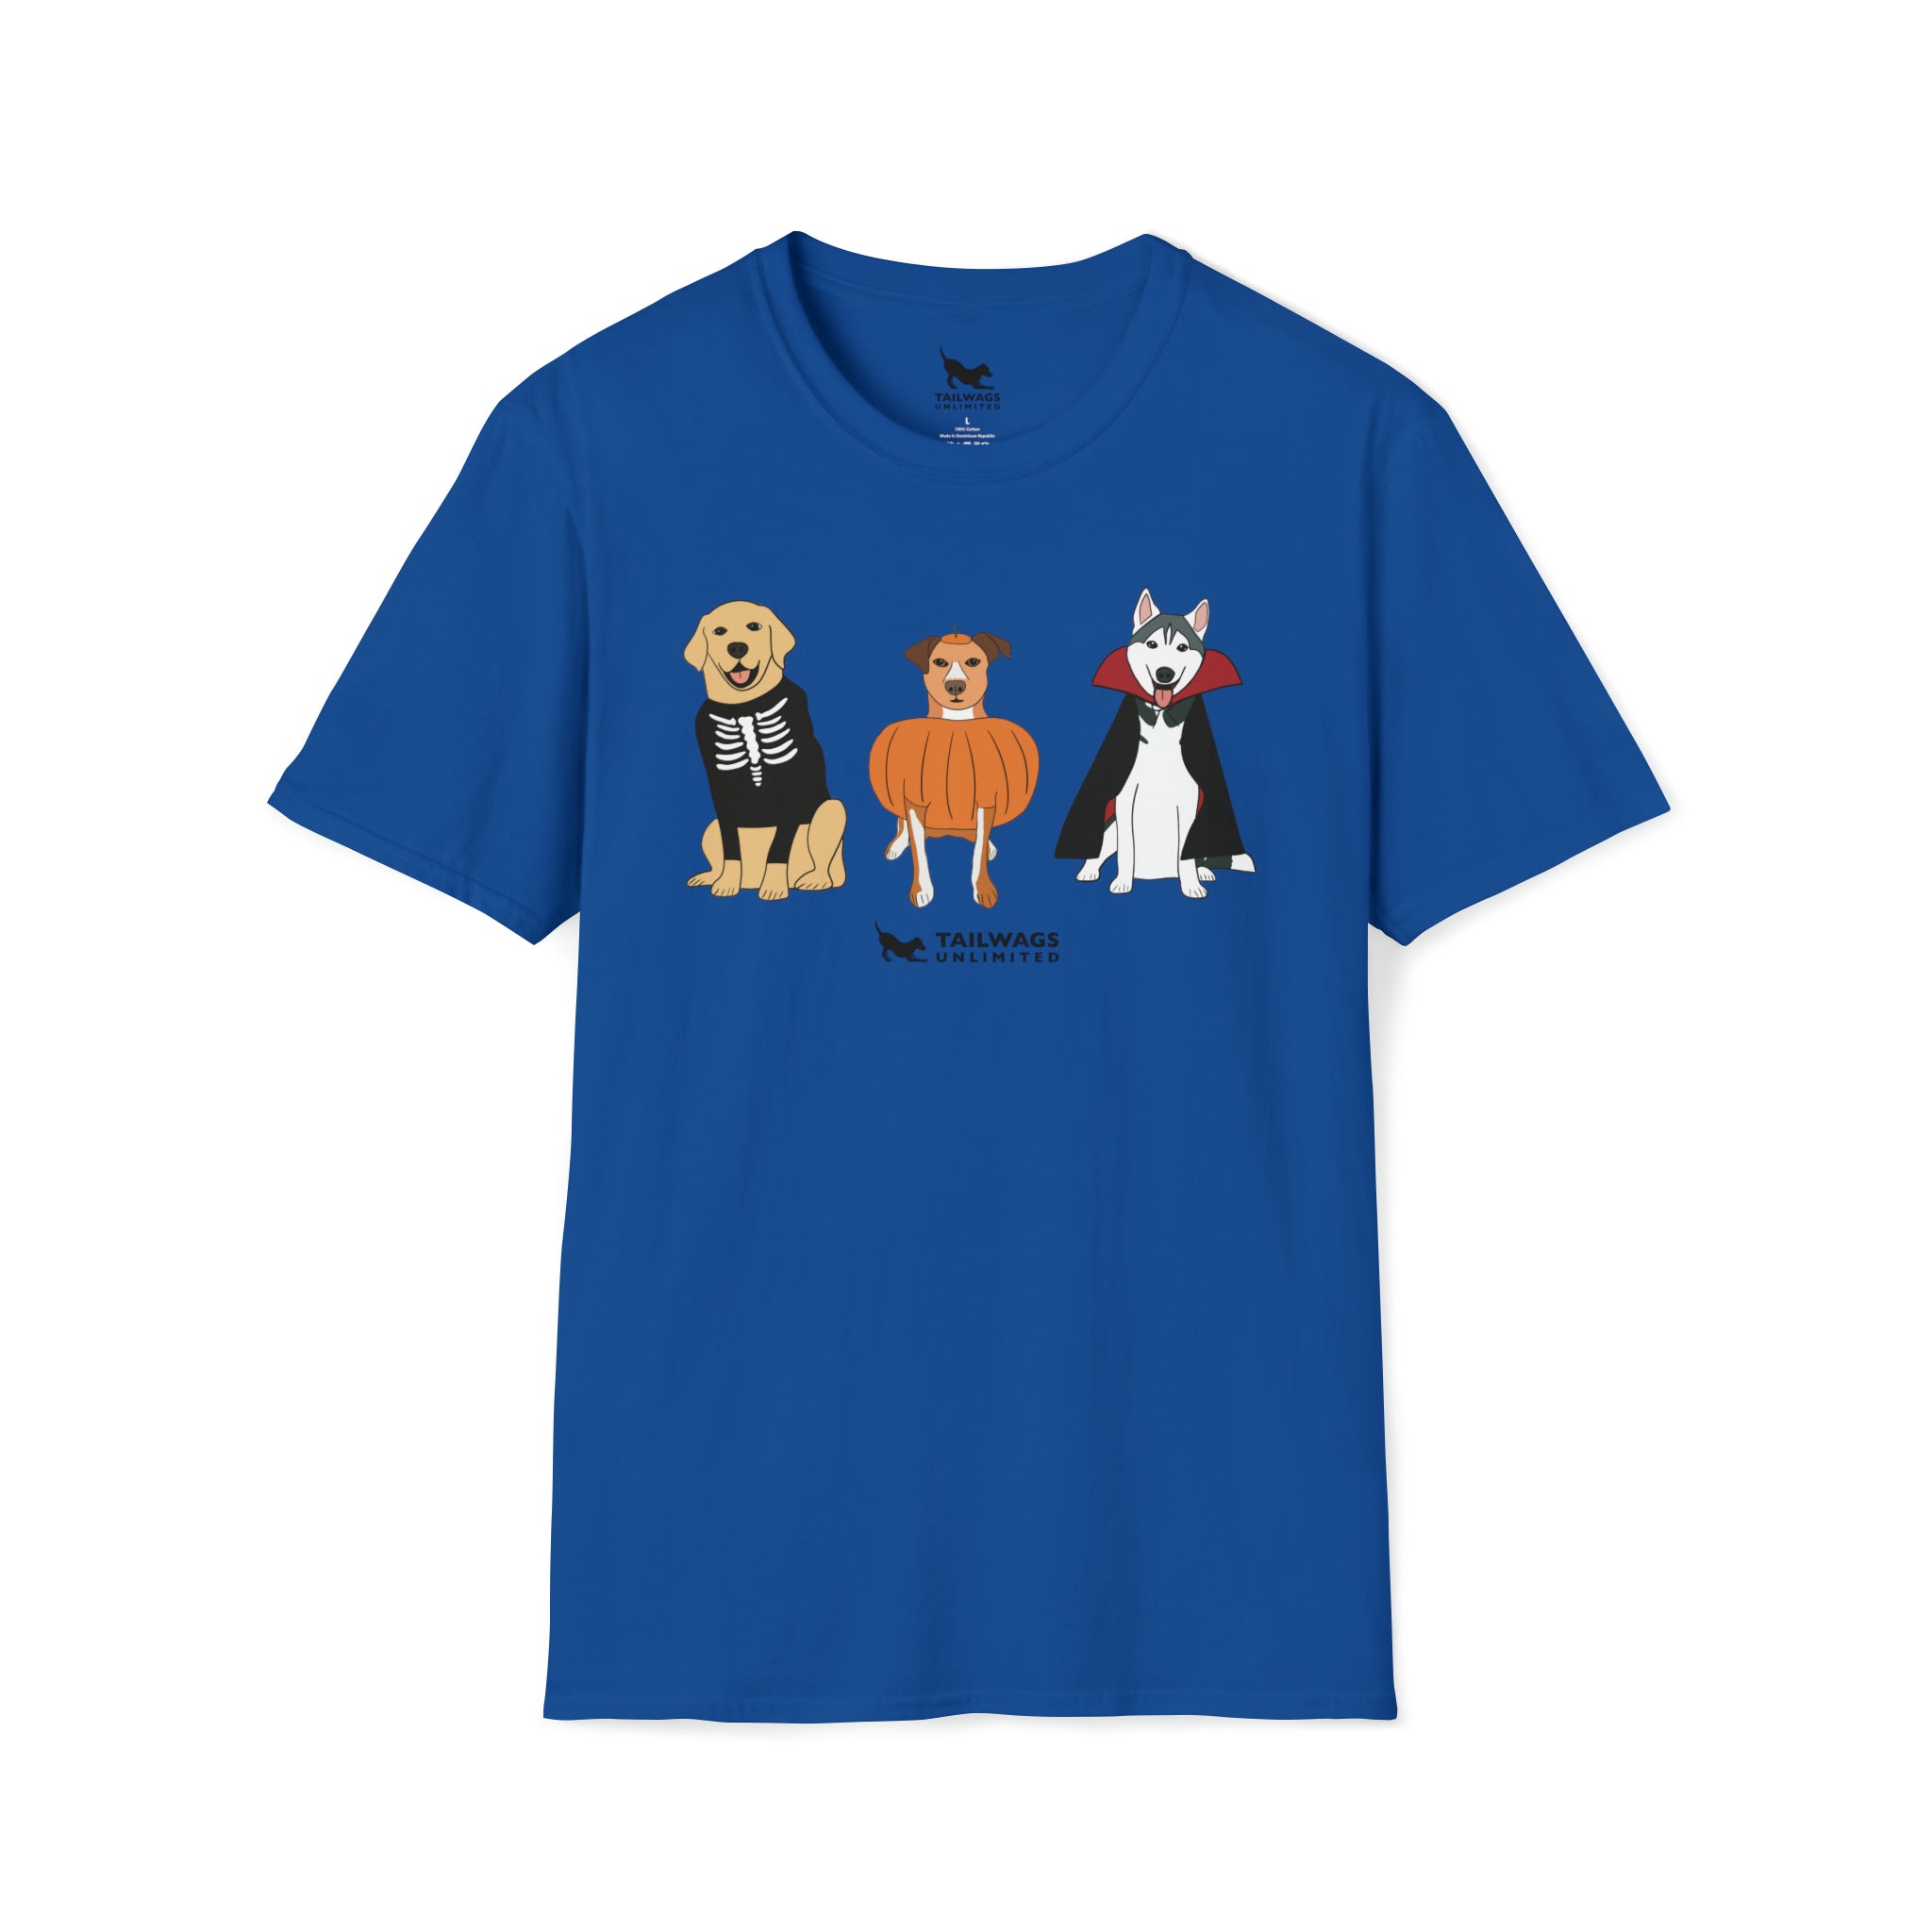 Dogs in Costume T-Shirt - TAILWAGS UNLIMITED